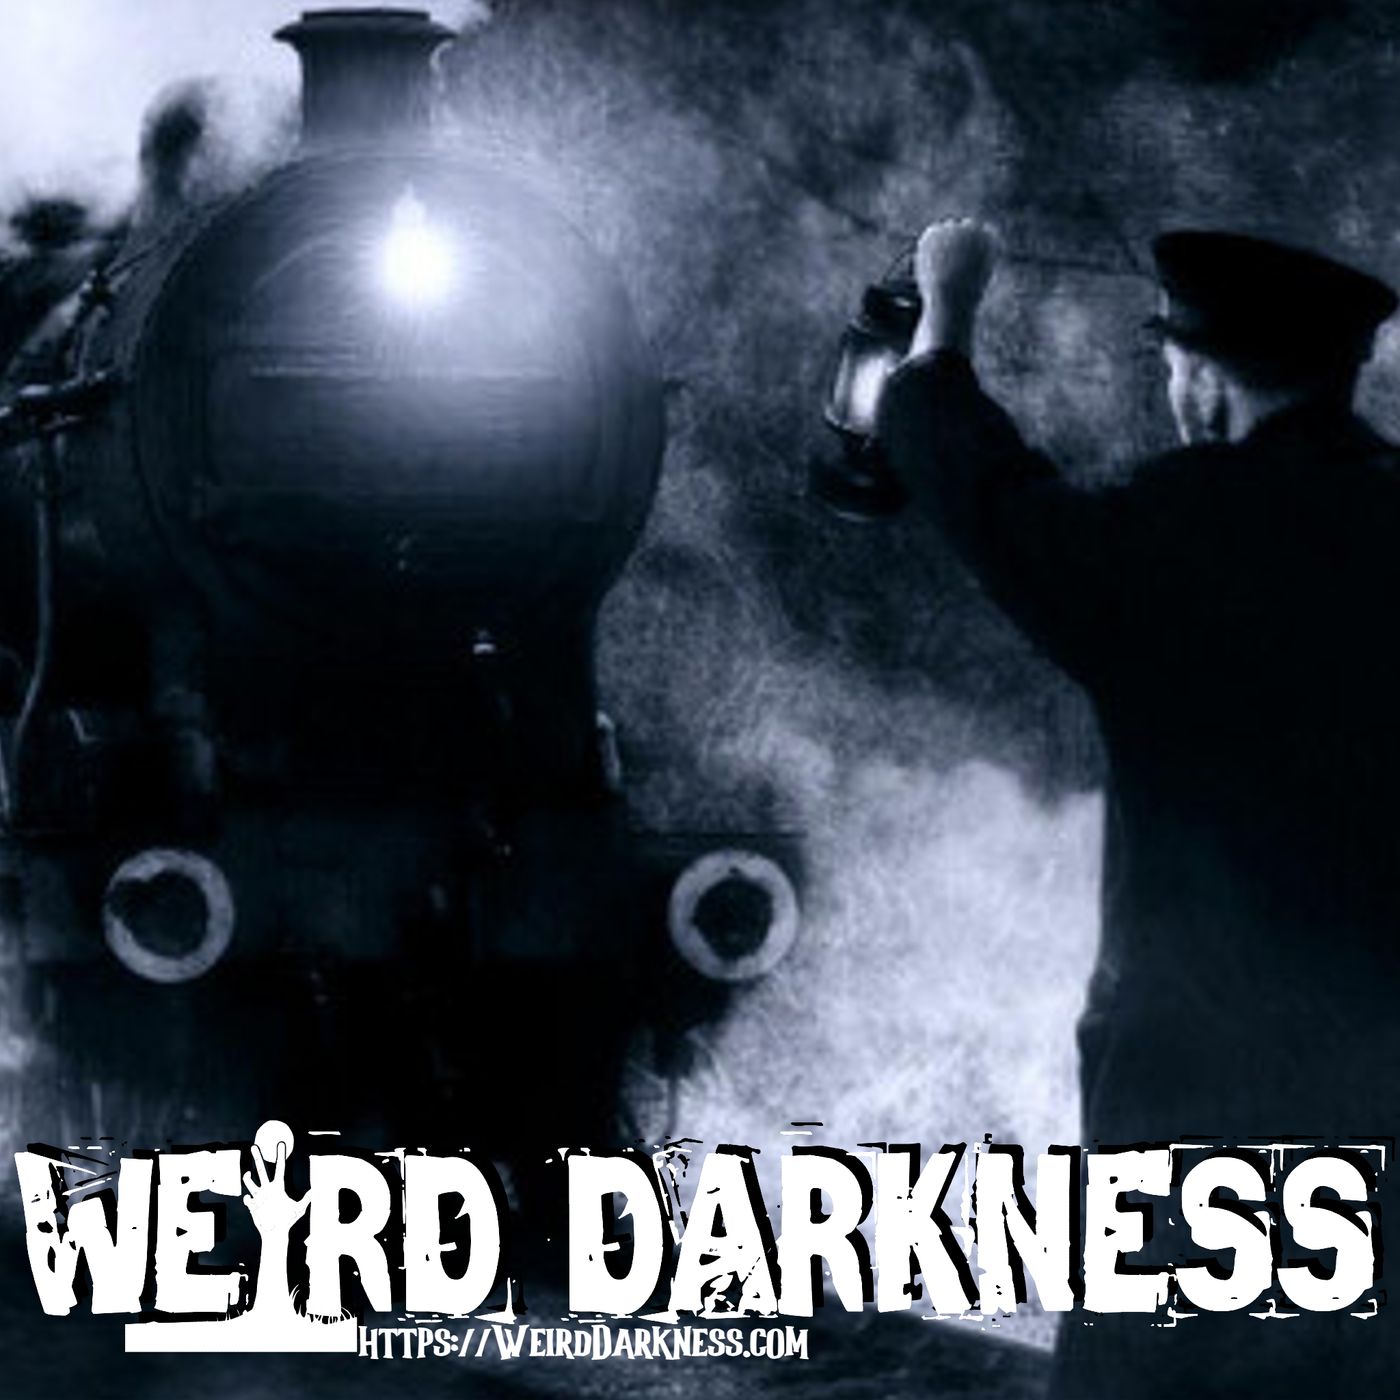 “THE SIGNALMAN” BY CHARLES DICKENS (Classic Horror Story) #WeirdDarkness